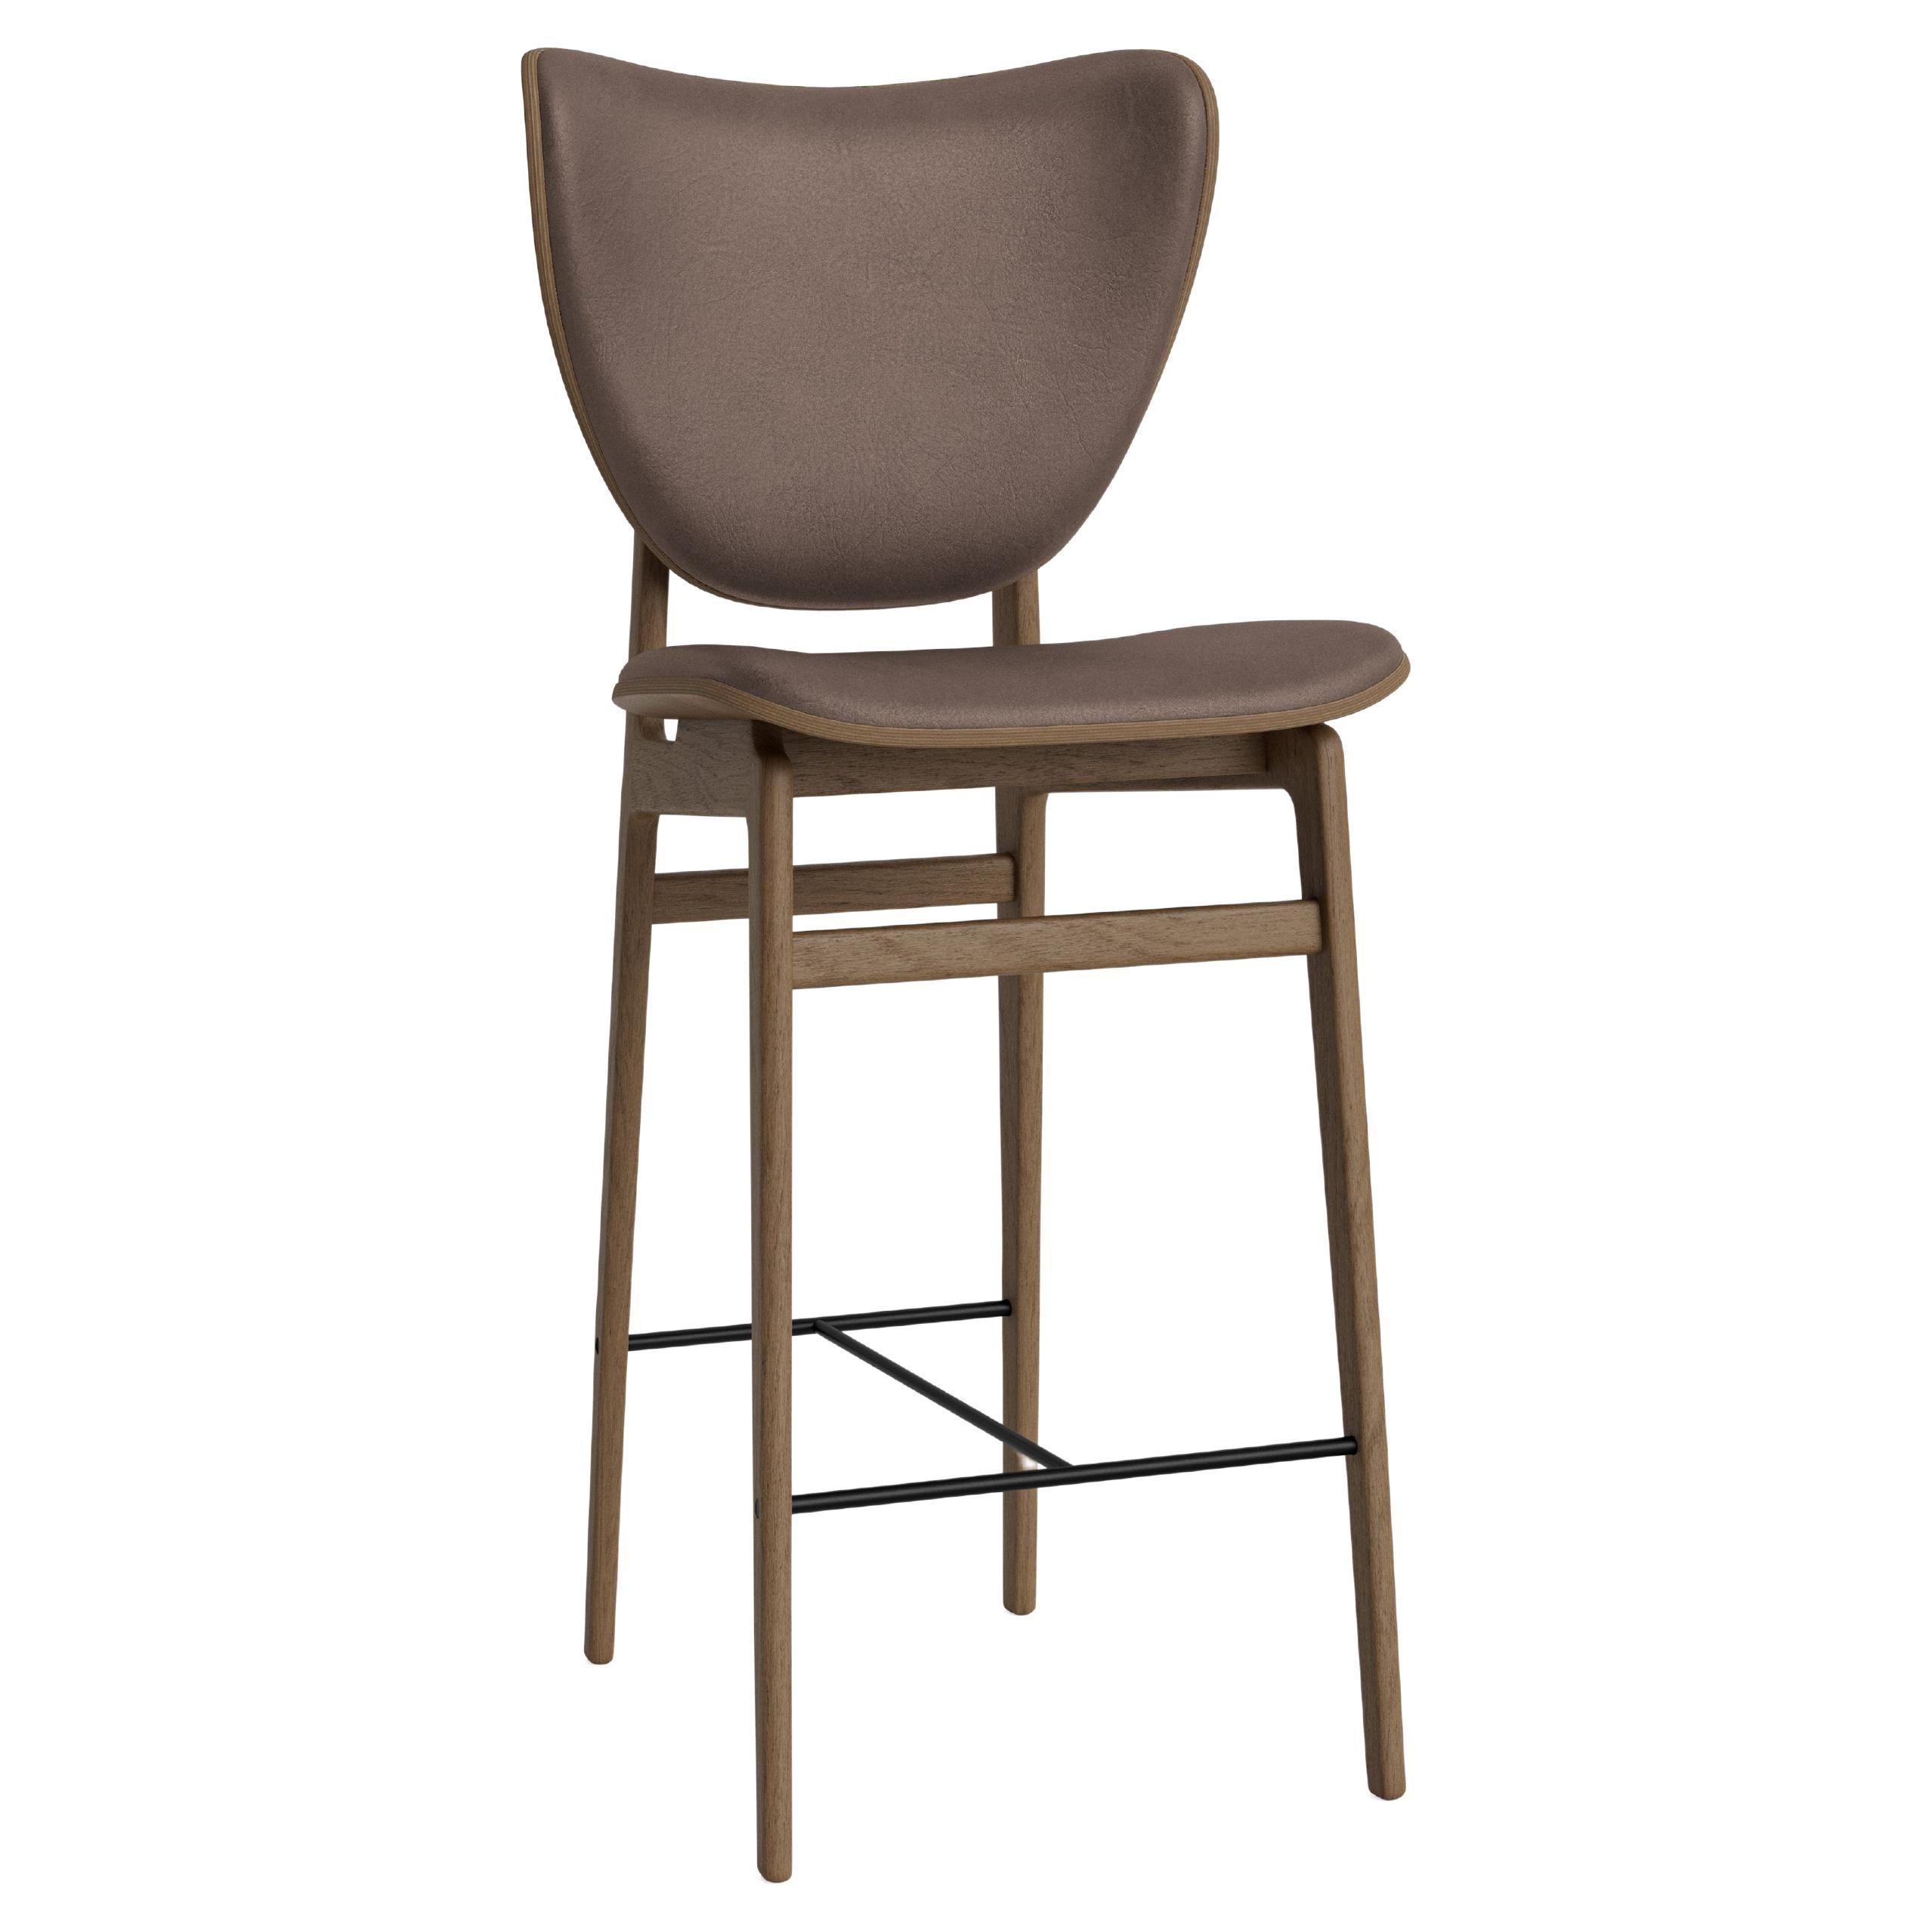 Contemporary 'Elephant' Bar Chair by Norr11, Light Smoked Oak, Leather Brown